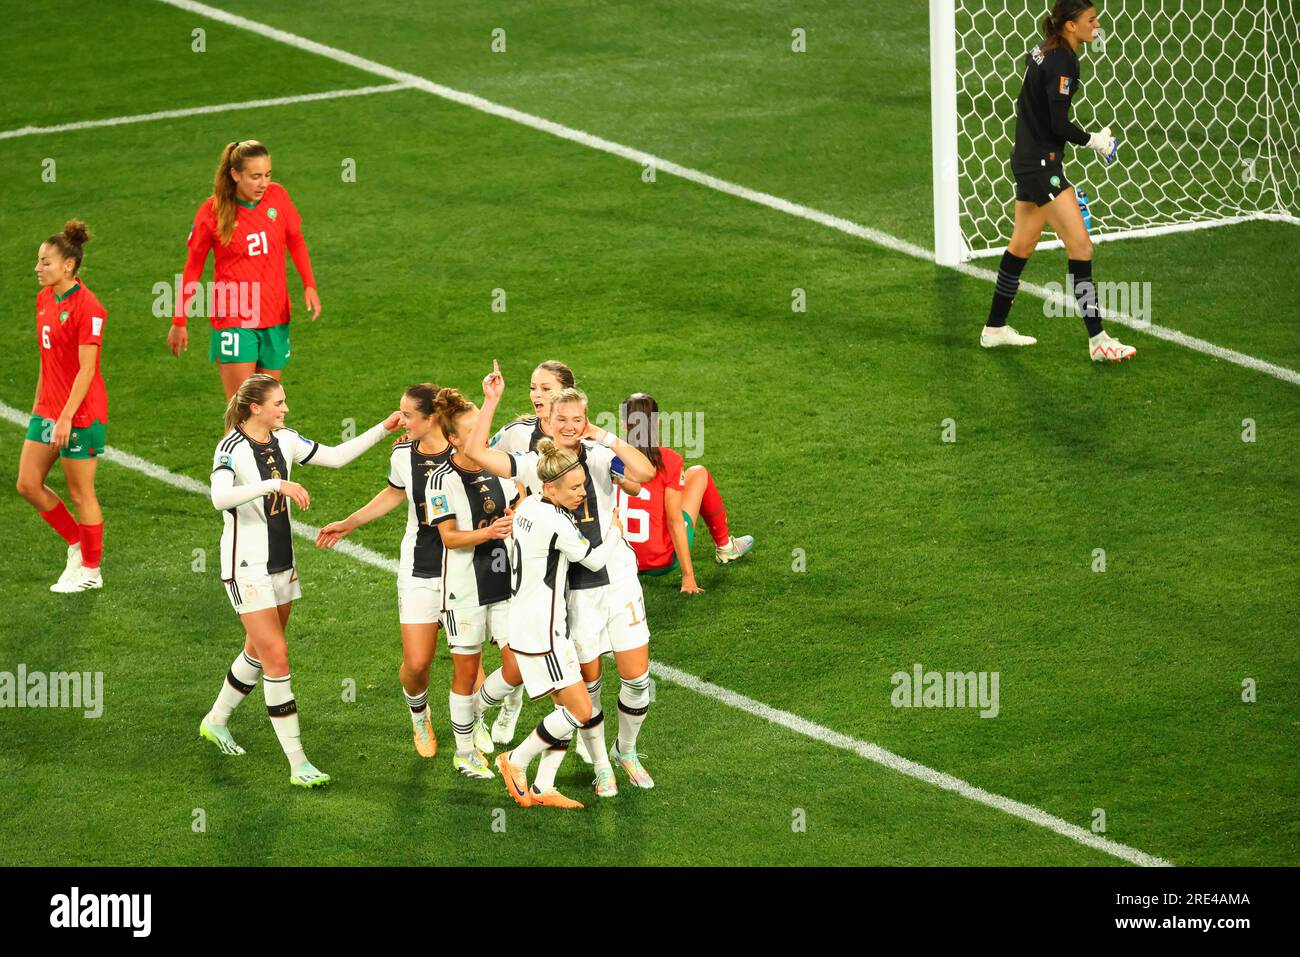 Alexandra Popp-Hoppe of Germany celebrates with her team after scoring  a goal during the FIFA Women's World Cup Australia & New Zealand 2023 Group match between Germany and Morocco at Melbourne Rectangular Stadium. Germany won the game 6-0. Stock Photo